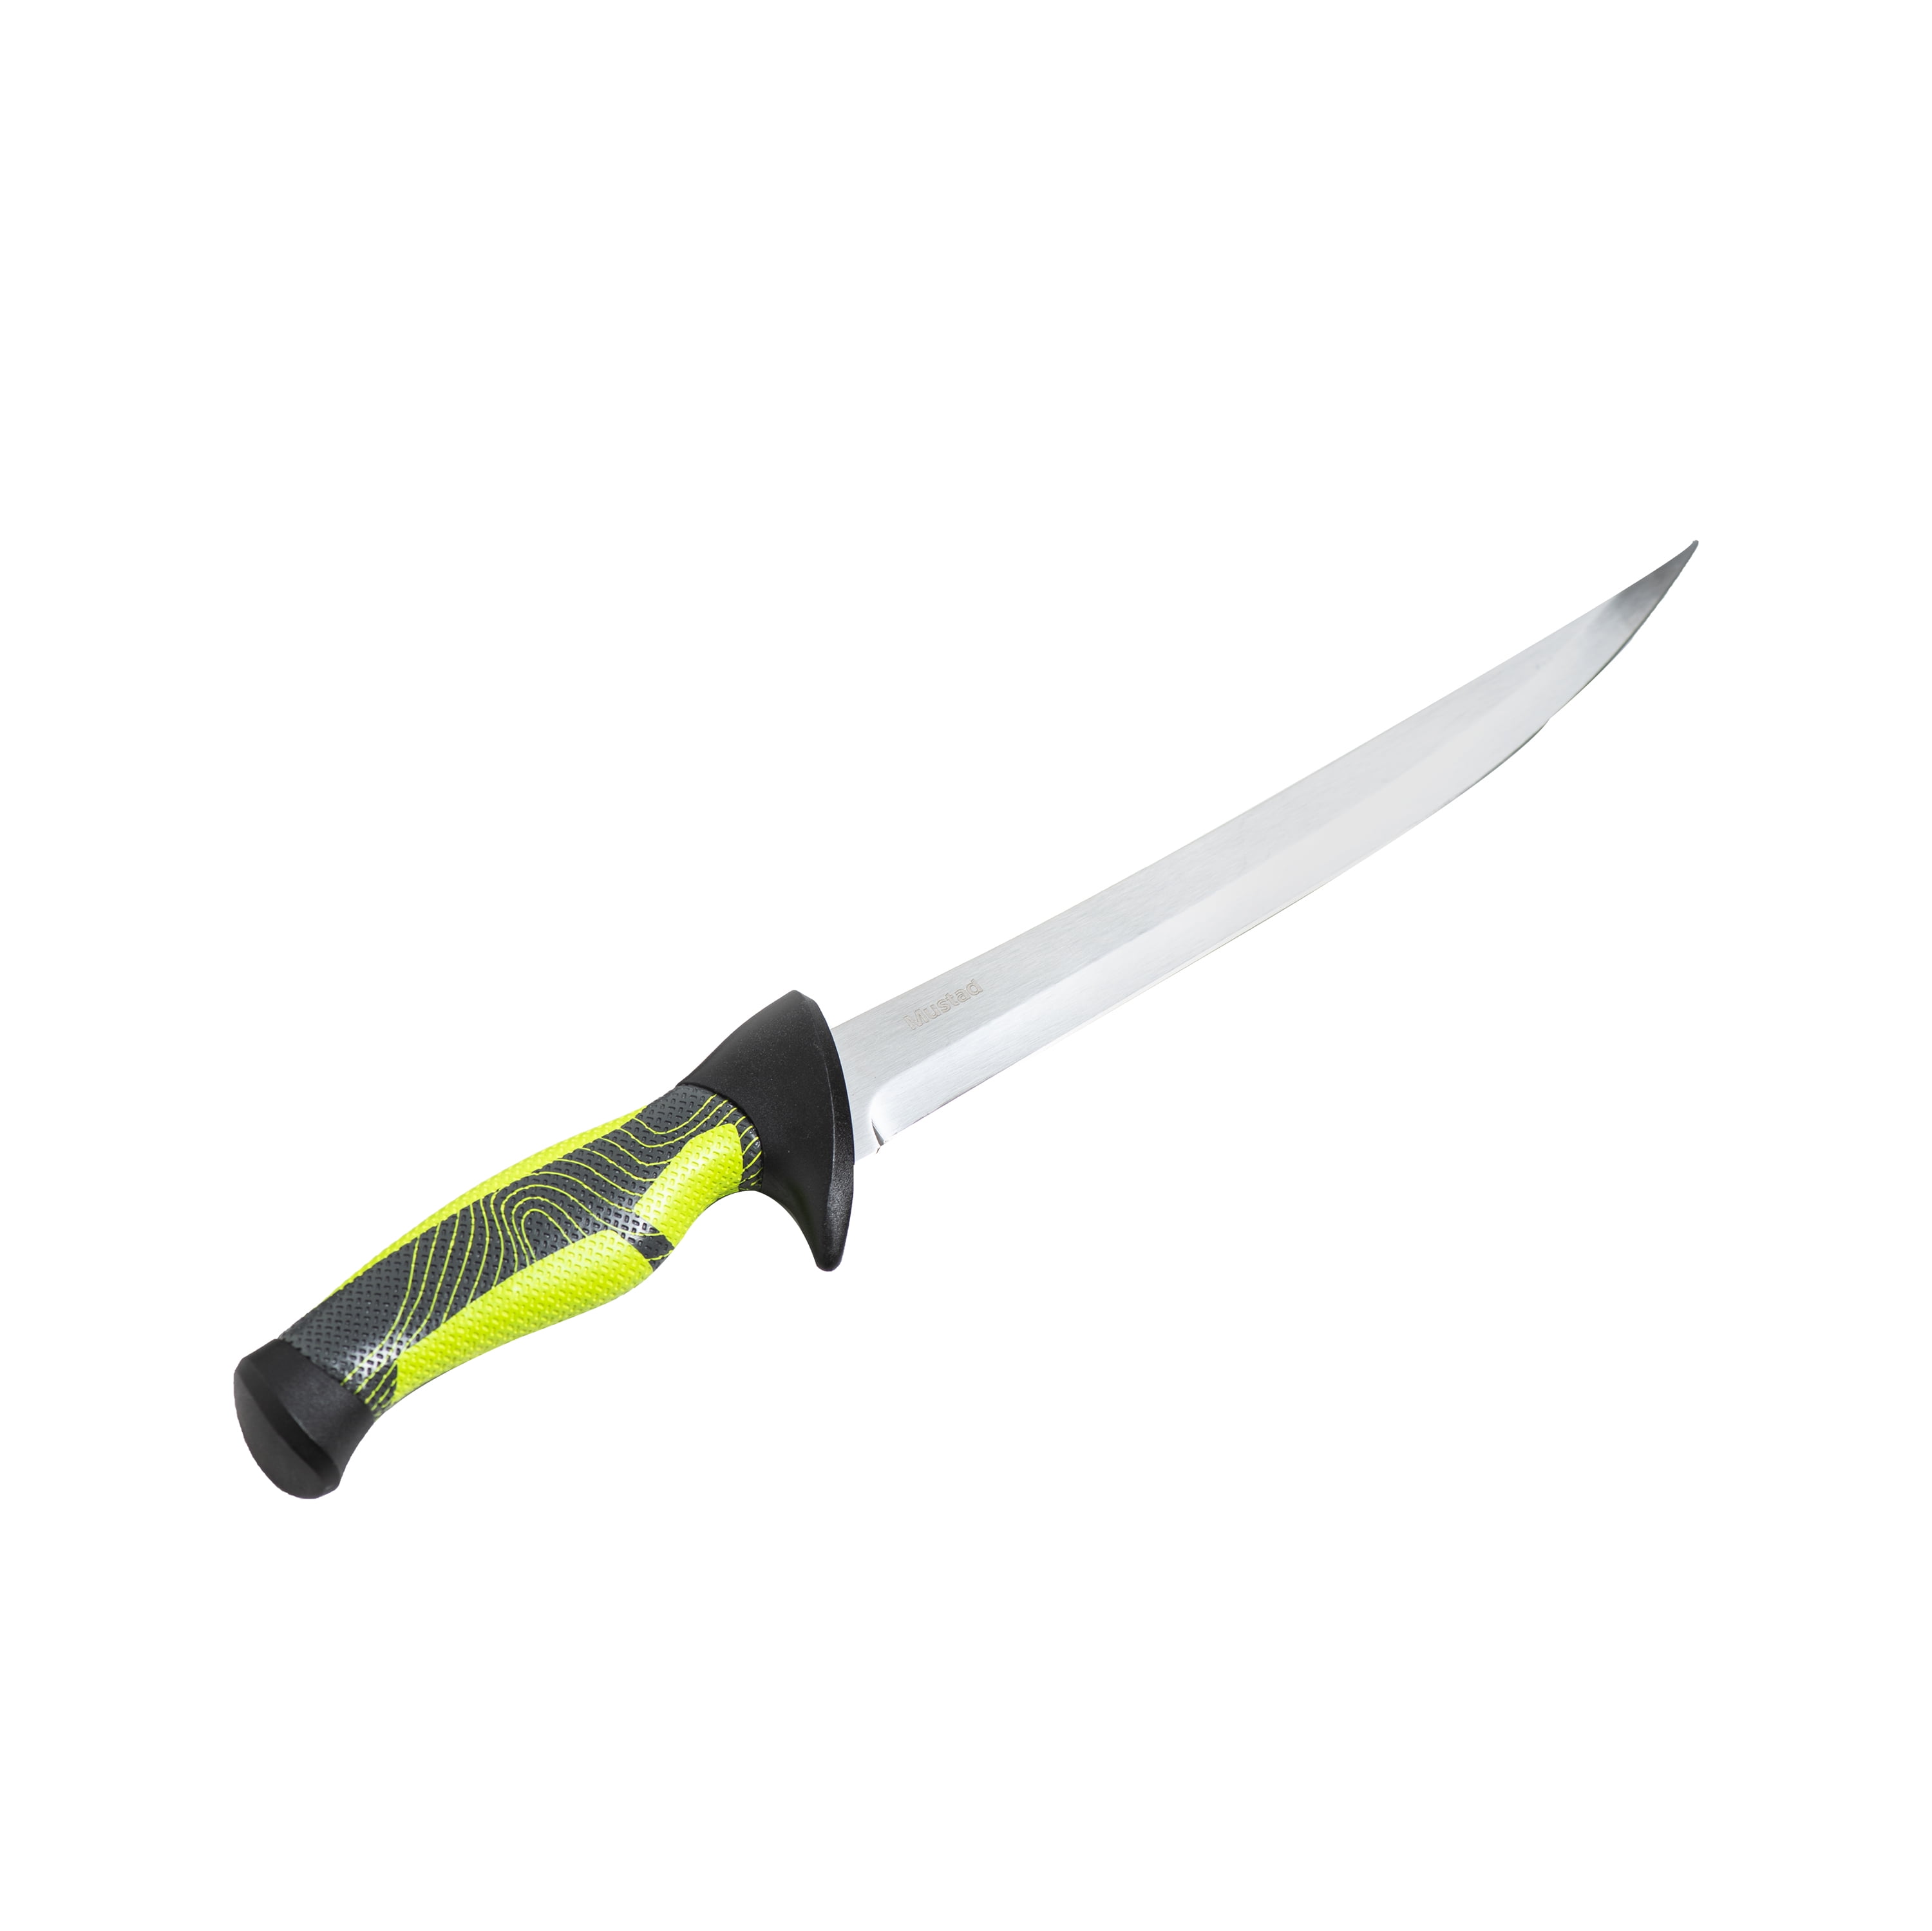 SMITH'S MR. CRAPPIE 51207 SLAB-O-MATIC ELECTRIC KNIFE GREEN 